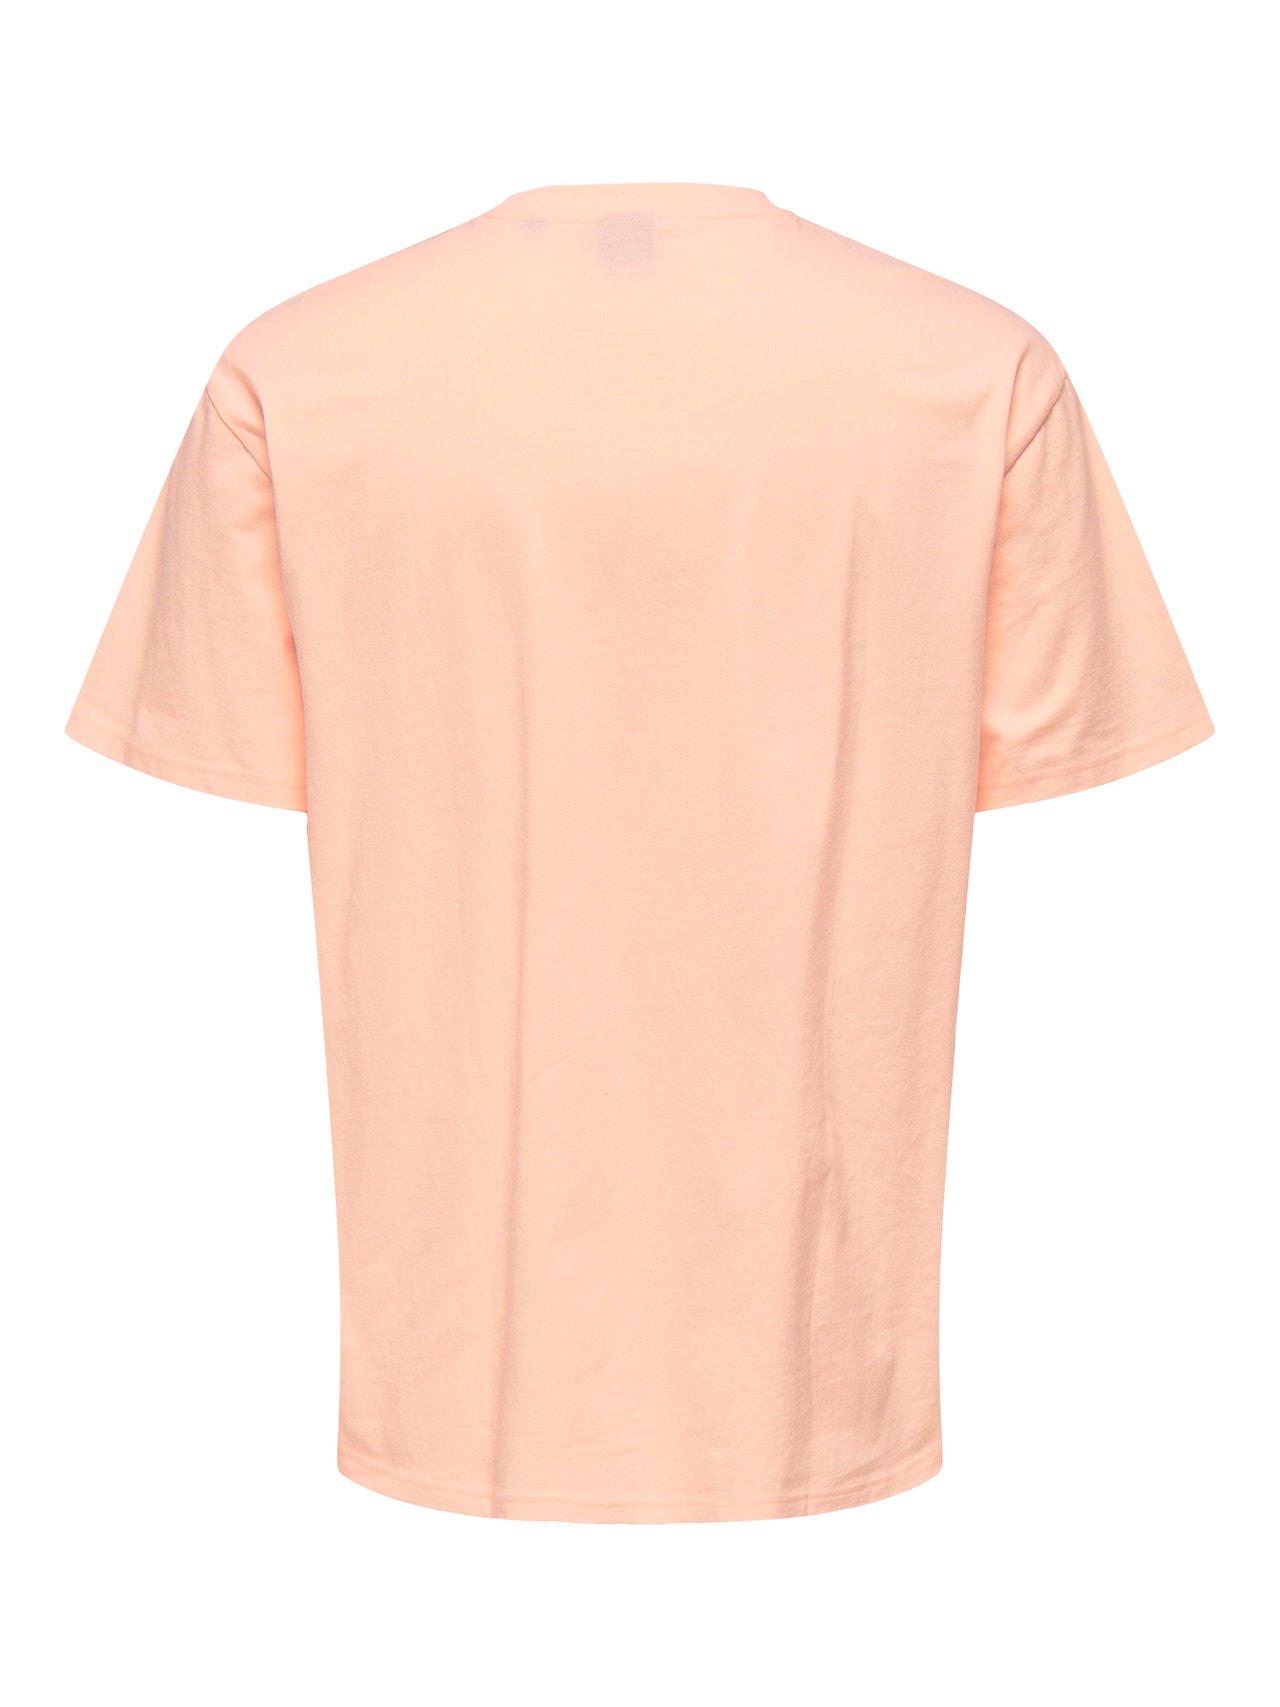 ONLY & SONS Relaxed Fit O-hals T-skjorte -Peach Nectar - 22022532